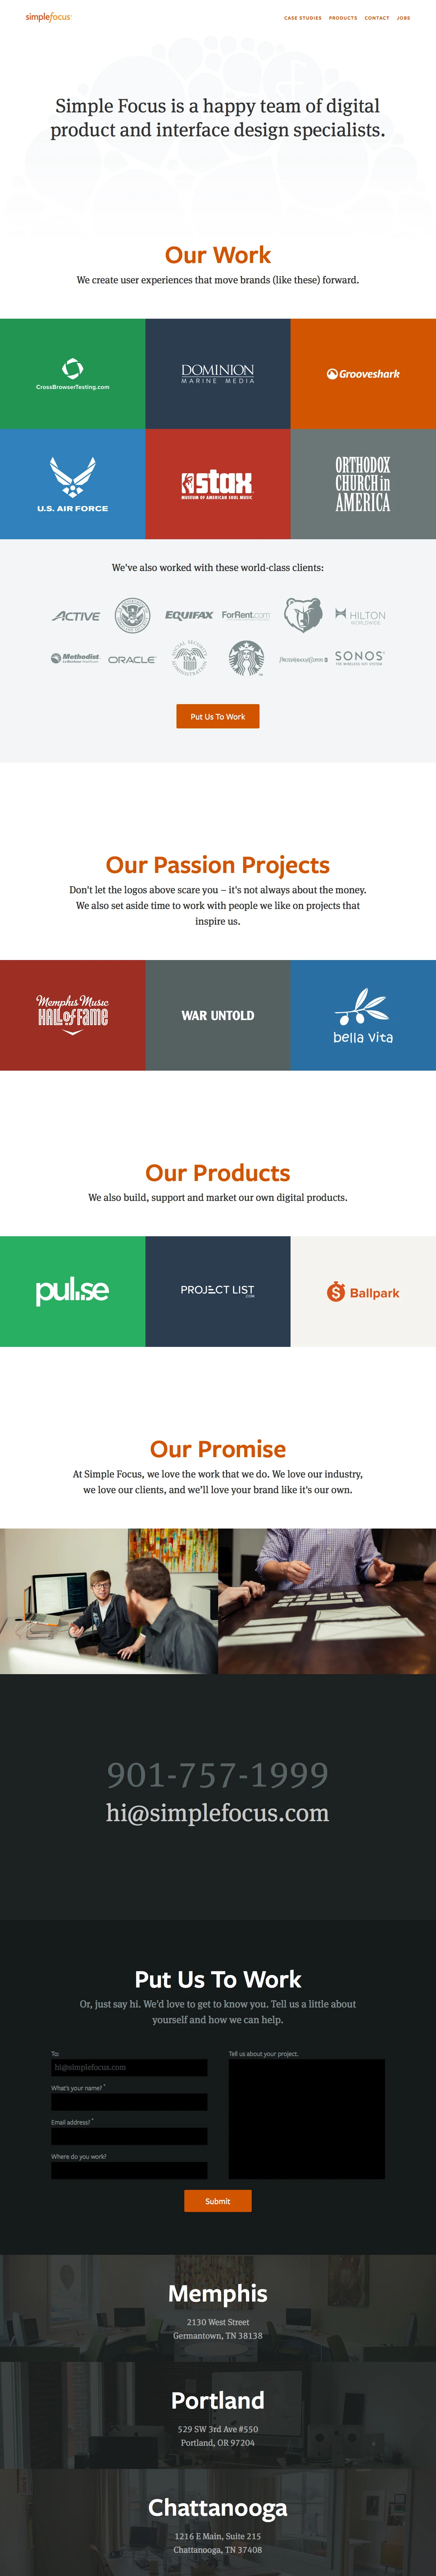 Simple Focus Landing Page Example: Simple Focus is a happy team of digital product and interface design specialists.